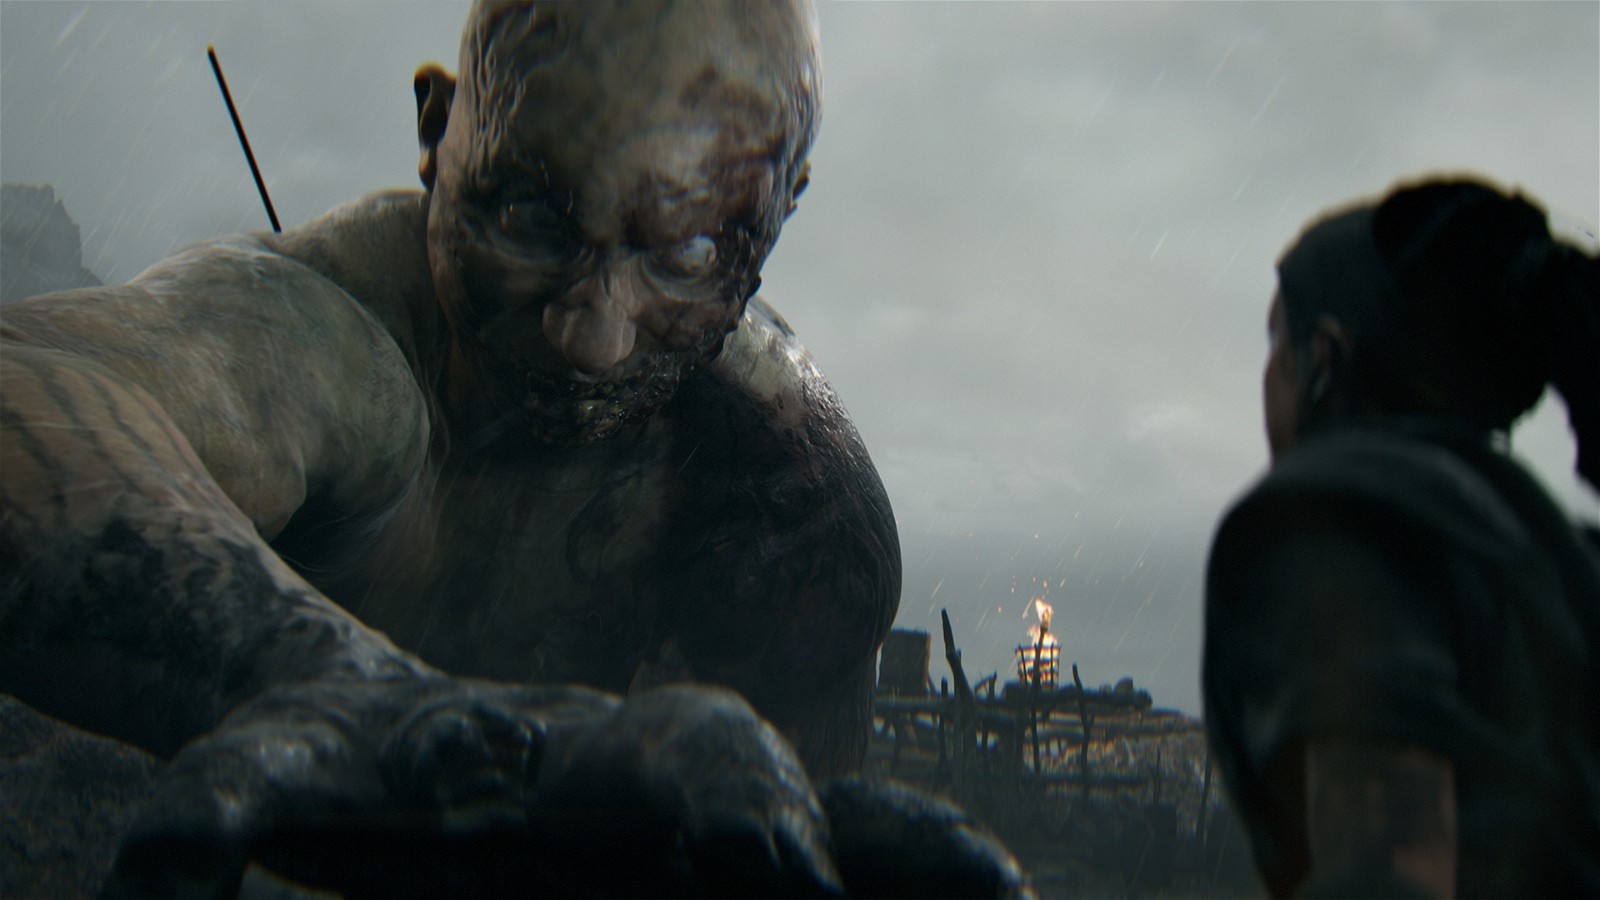 The Giant in the 2021 gameplay trailer is a perfect example of how the game blends history and fantasy.